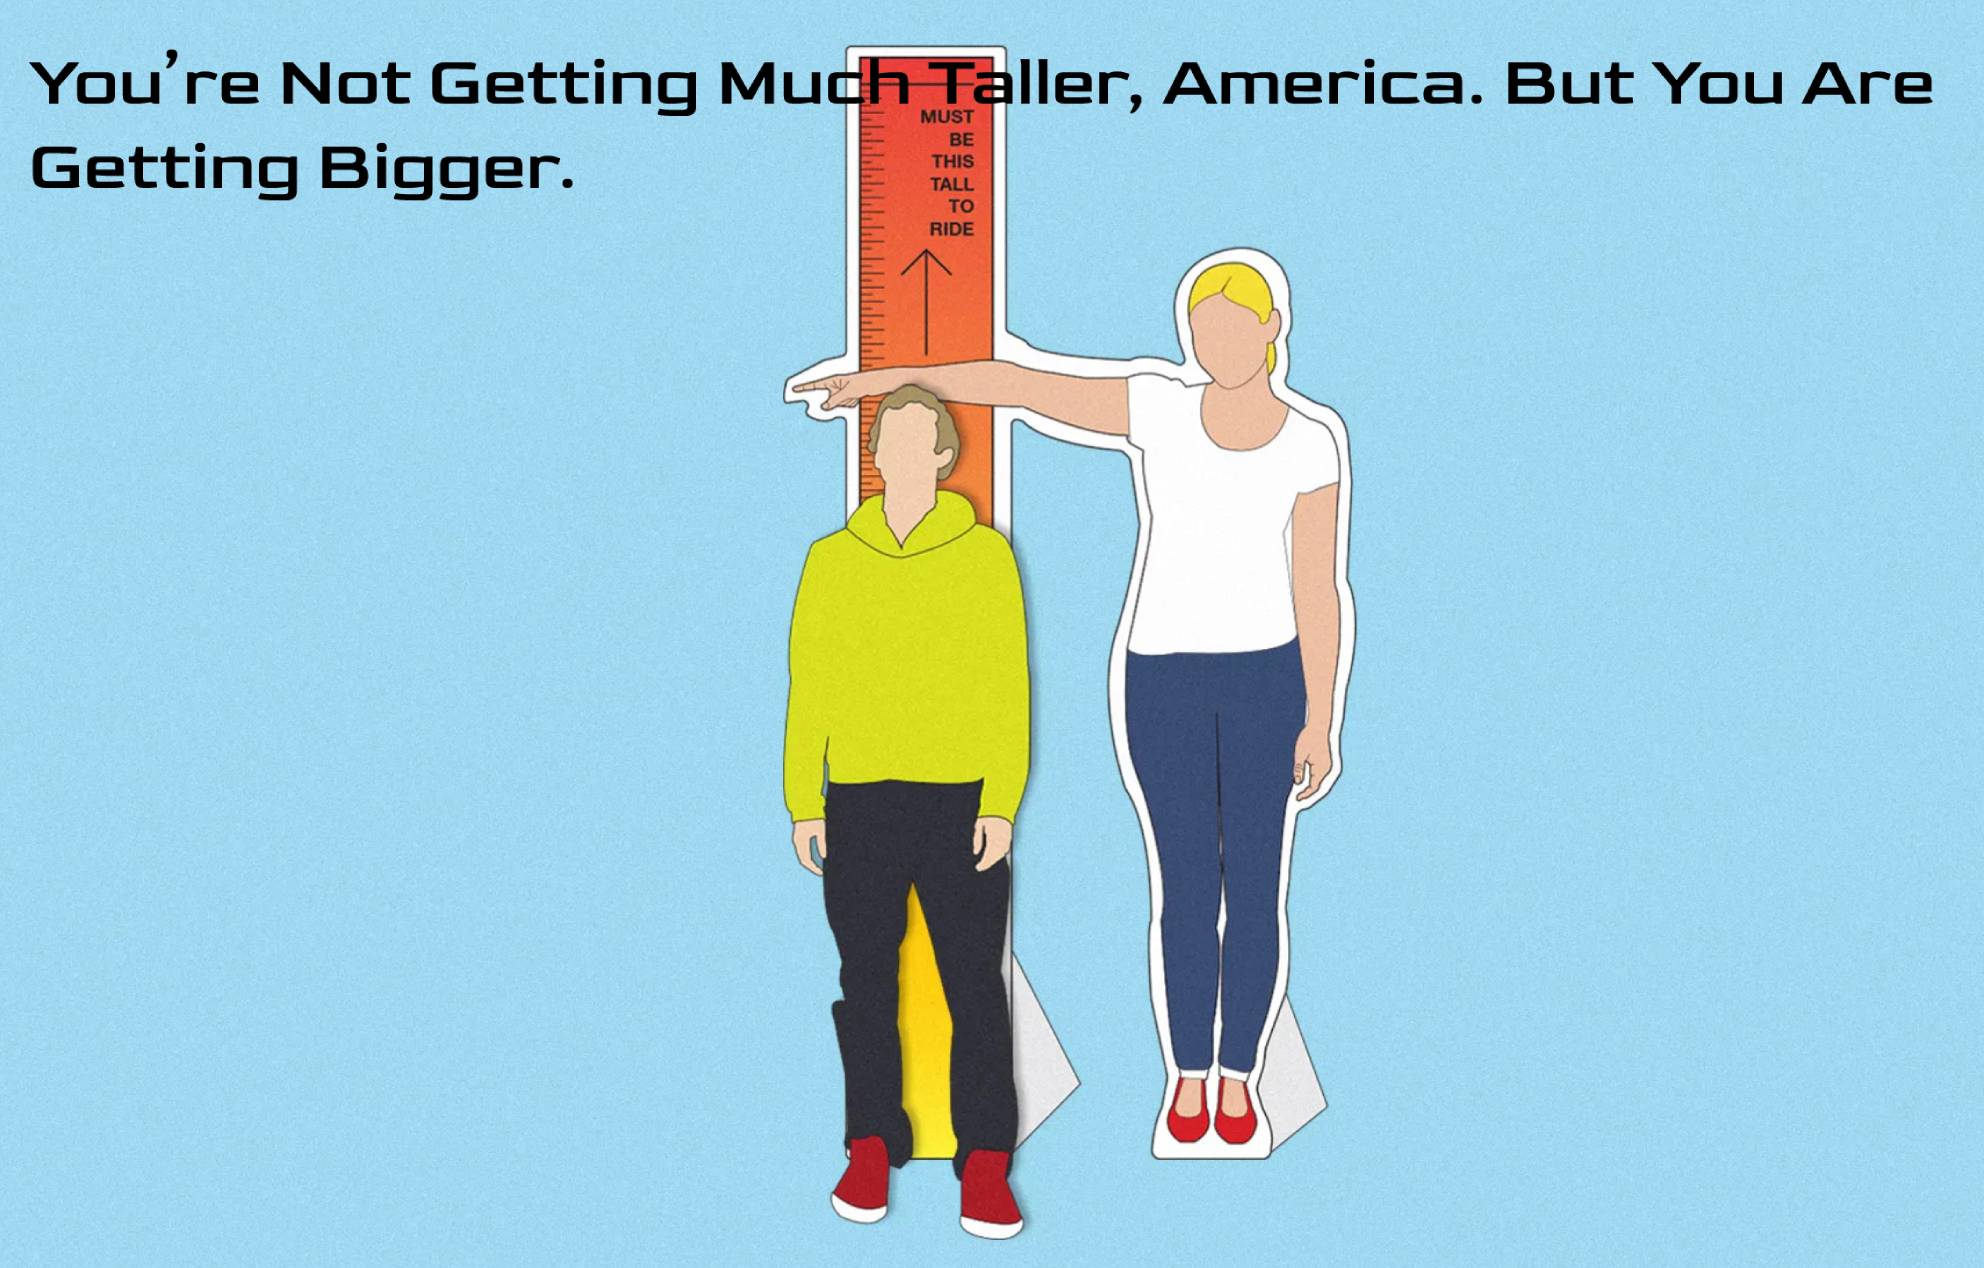 You’re Not Getting Much Taller, America. But You Are Getting Bigger.